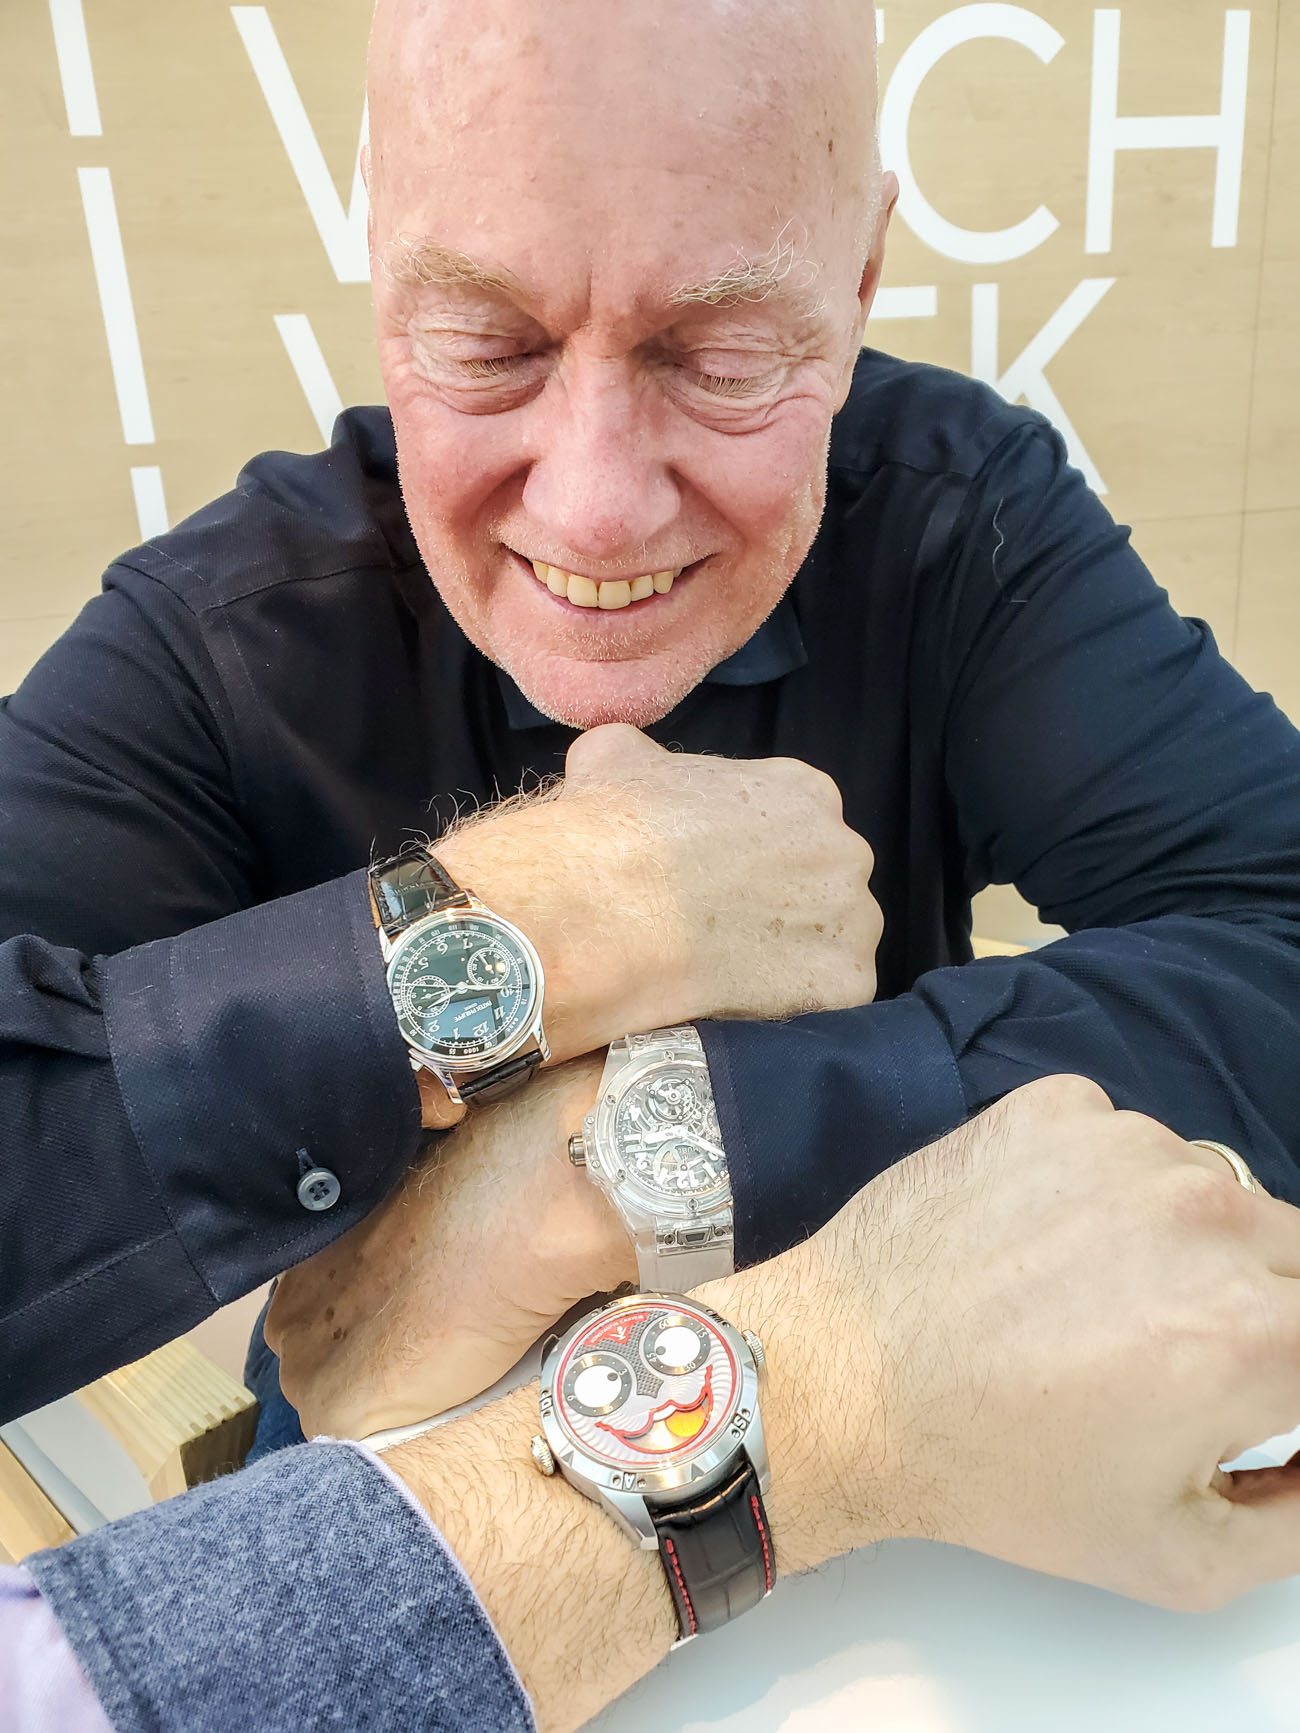 Watch Expert reacts to Jean-Claude Biver on Talking Watches